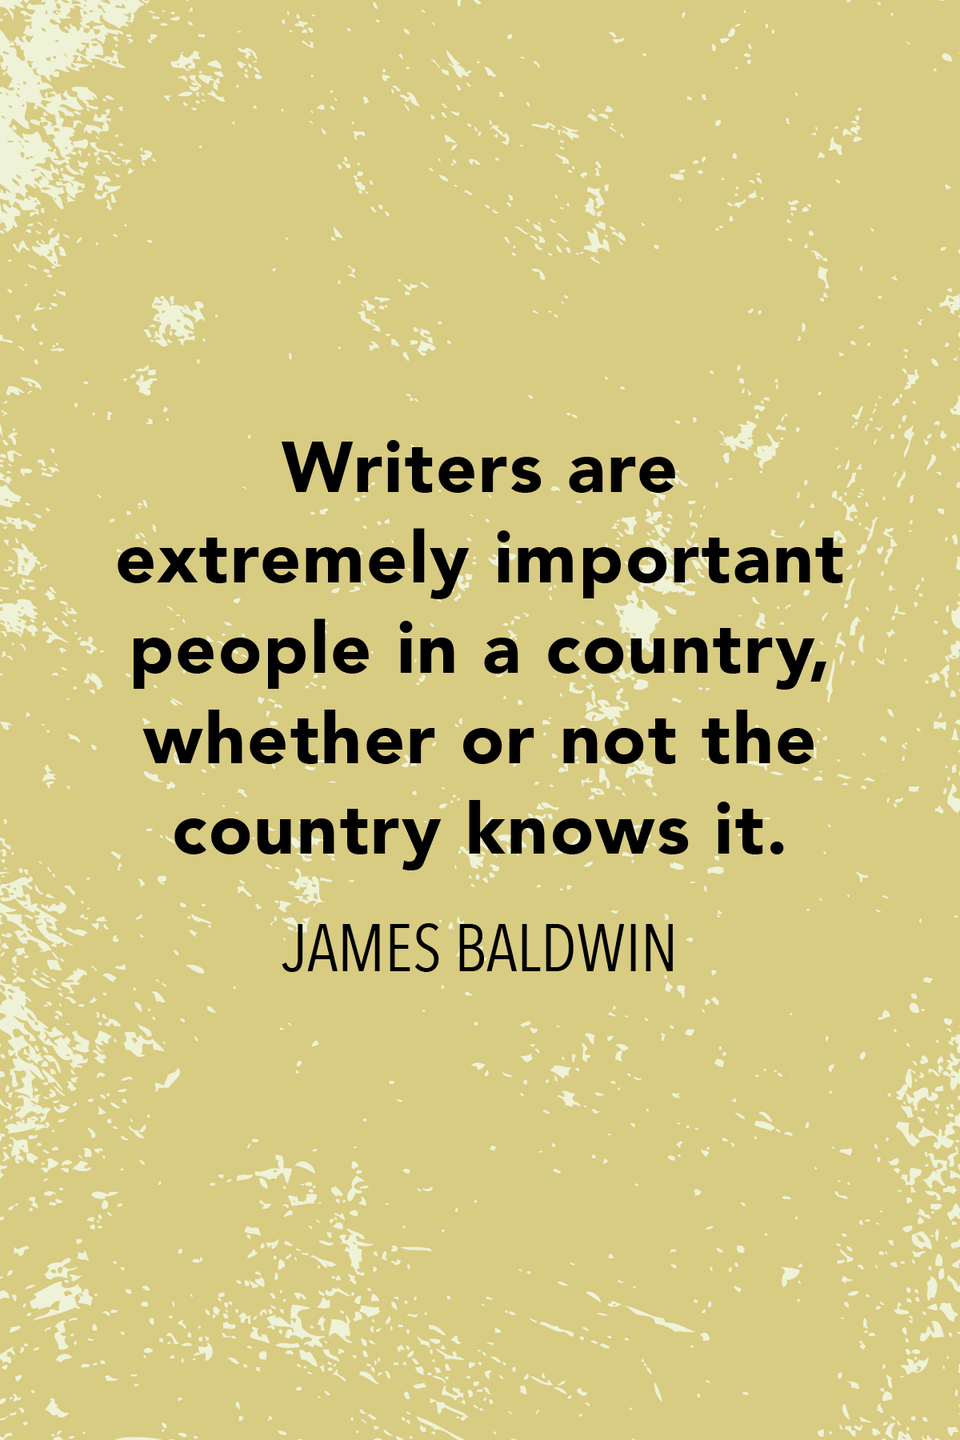 On the importance of writers